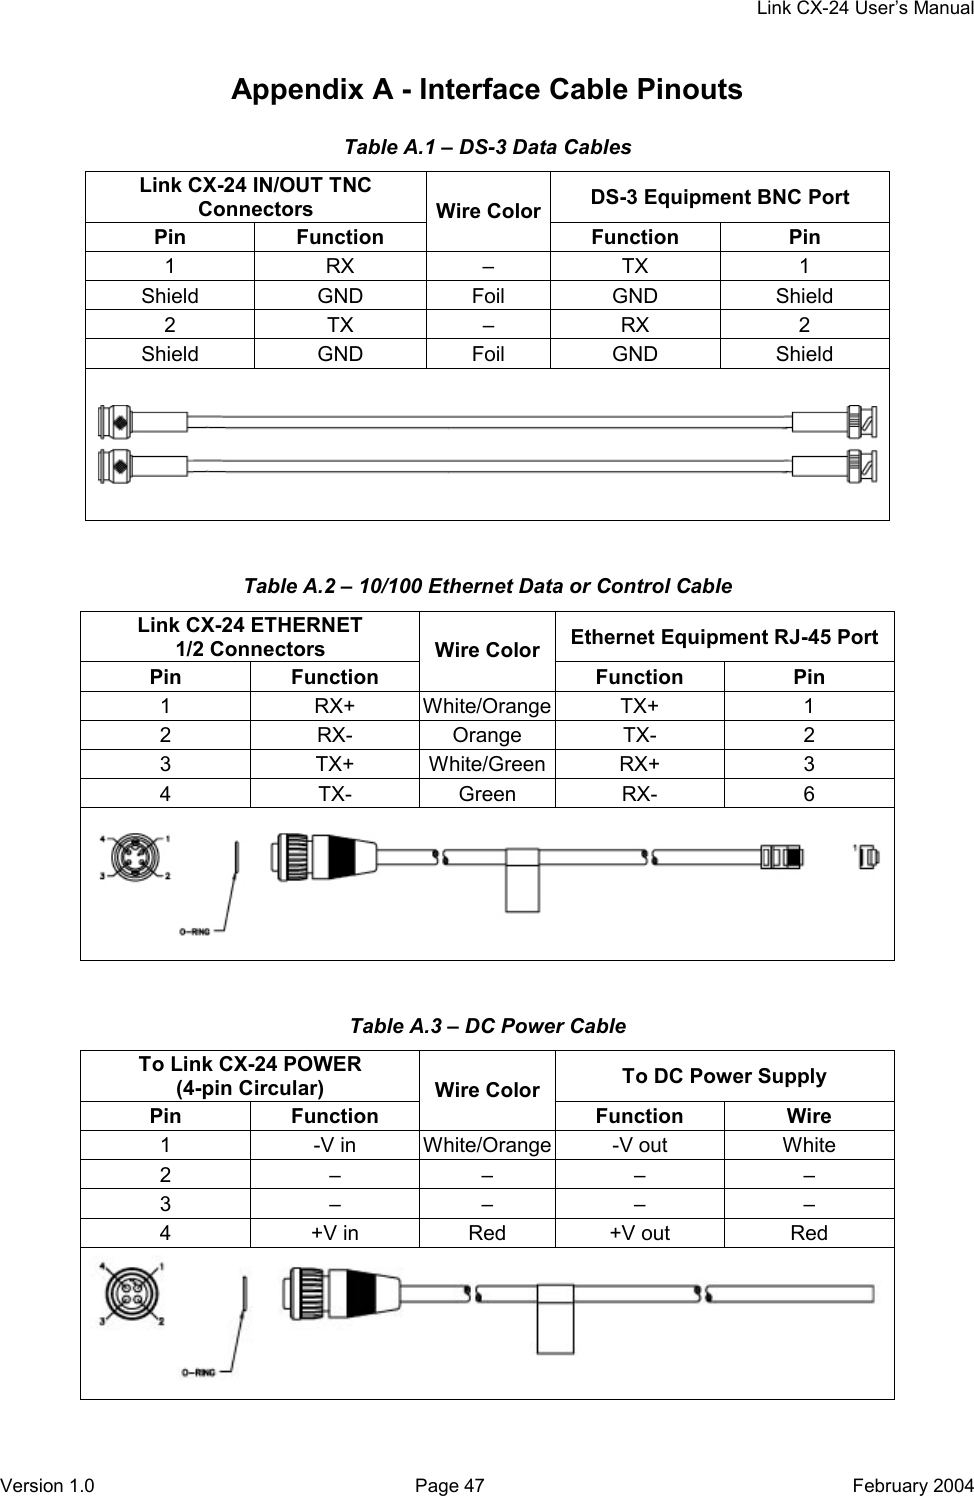     Link CX-24 User’s Manual Version 1.0  Page 47  February 2004 Appendix A - Interface Cable Pinouts Table A.1 – DS-3 Data Cables Link CX-24 IN/OUT TNC Connectors  DS-3 Equipment BNC Port Pin Function Wire ColorFunction Pin 1 RX – TX 1 Shield GND Foil GND Shield 2 TX – RX 2 Shield GND Foil GND Shield  Table A.2 – 10/100 Ethernet Data or Control Cable Link CX-24 ETHERNET 1/2 Connectors  Ethernet Equipment RJ-45 Port Pin Function Wire Color Function Pin 1 RX+ White/Orange TX+ 1 2 RX- Orange TX- 2 3 TX+ White/Green RX+ 3 4 TX- Green RX- 6  Table A.3 – DC Power Cable To Link CX-24 POWER (4-pin Circular)  To DC Power Supply Pin Function Wire Color Function Wire 1  -V in  White/Orange -V out  White 2 – – – – 3 – – – – 4  +V in  Red  +V out  Red 